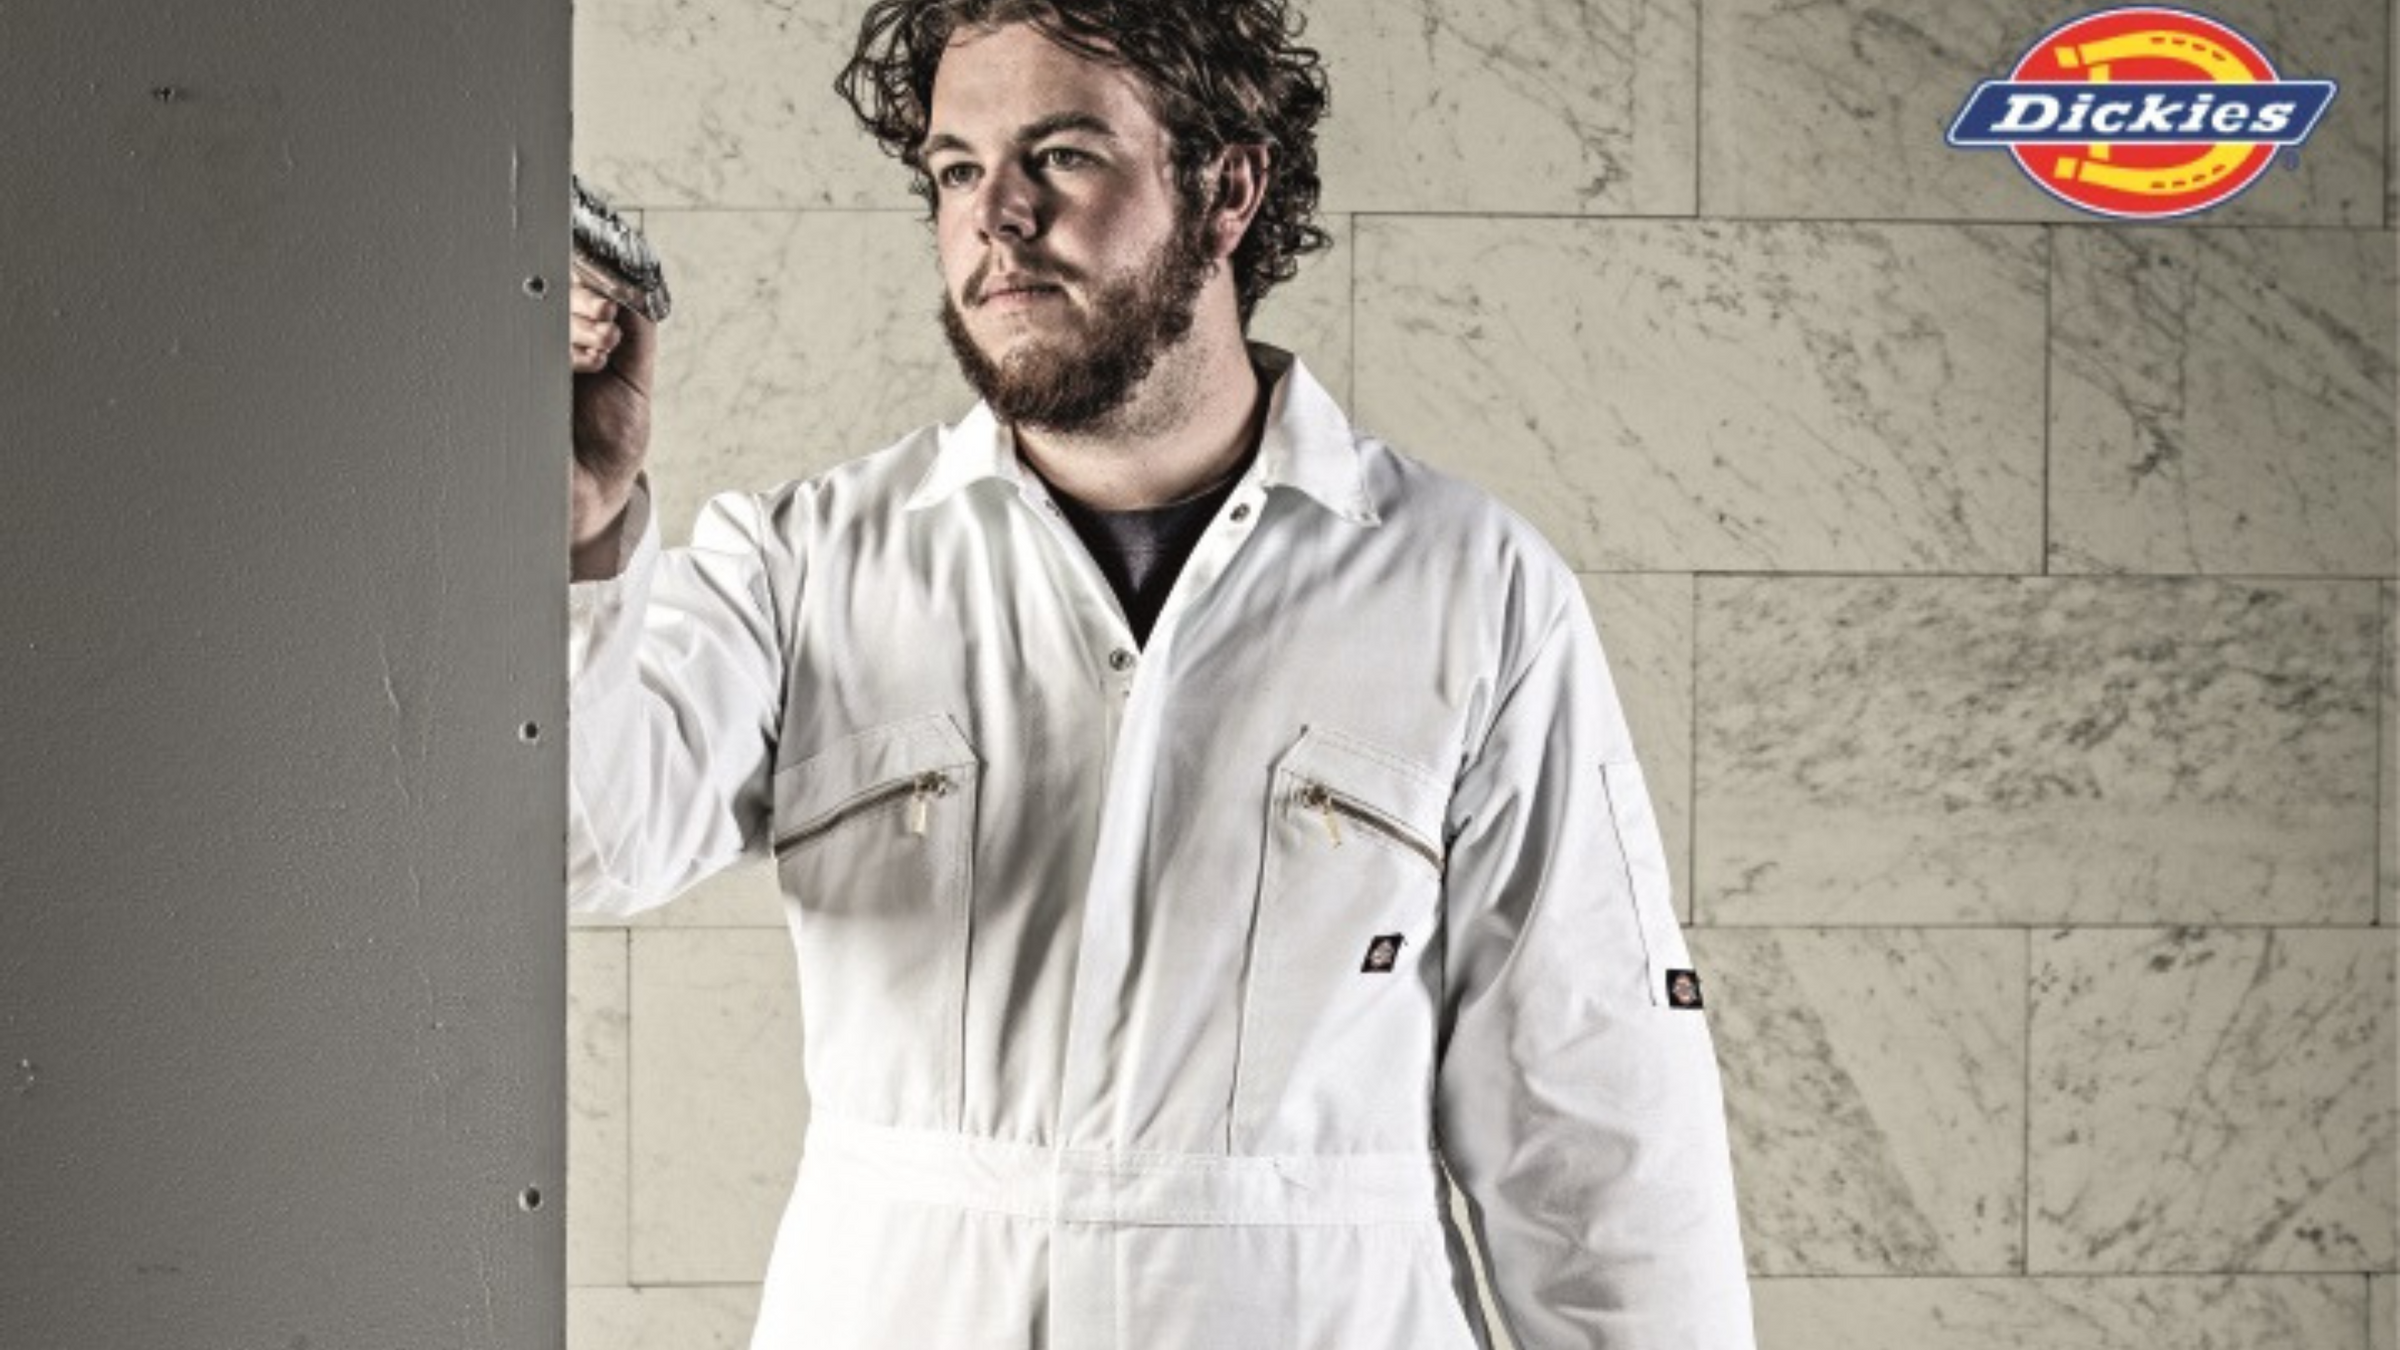 A dickies model wearing white overall for workweargurus.com